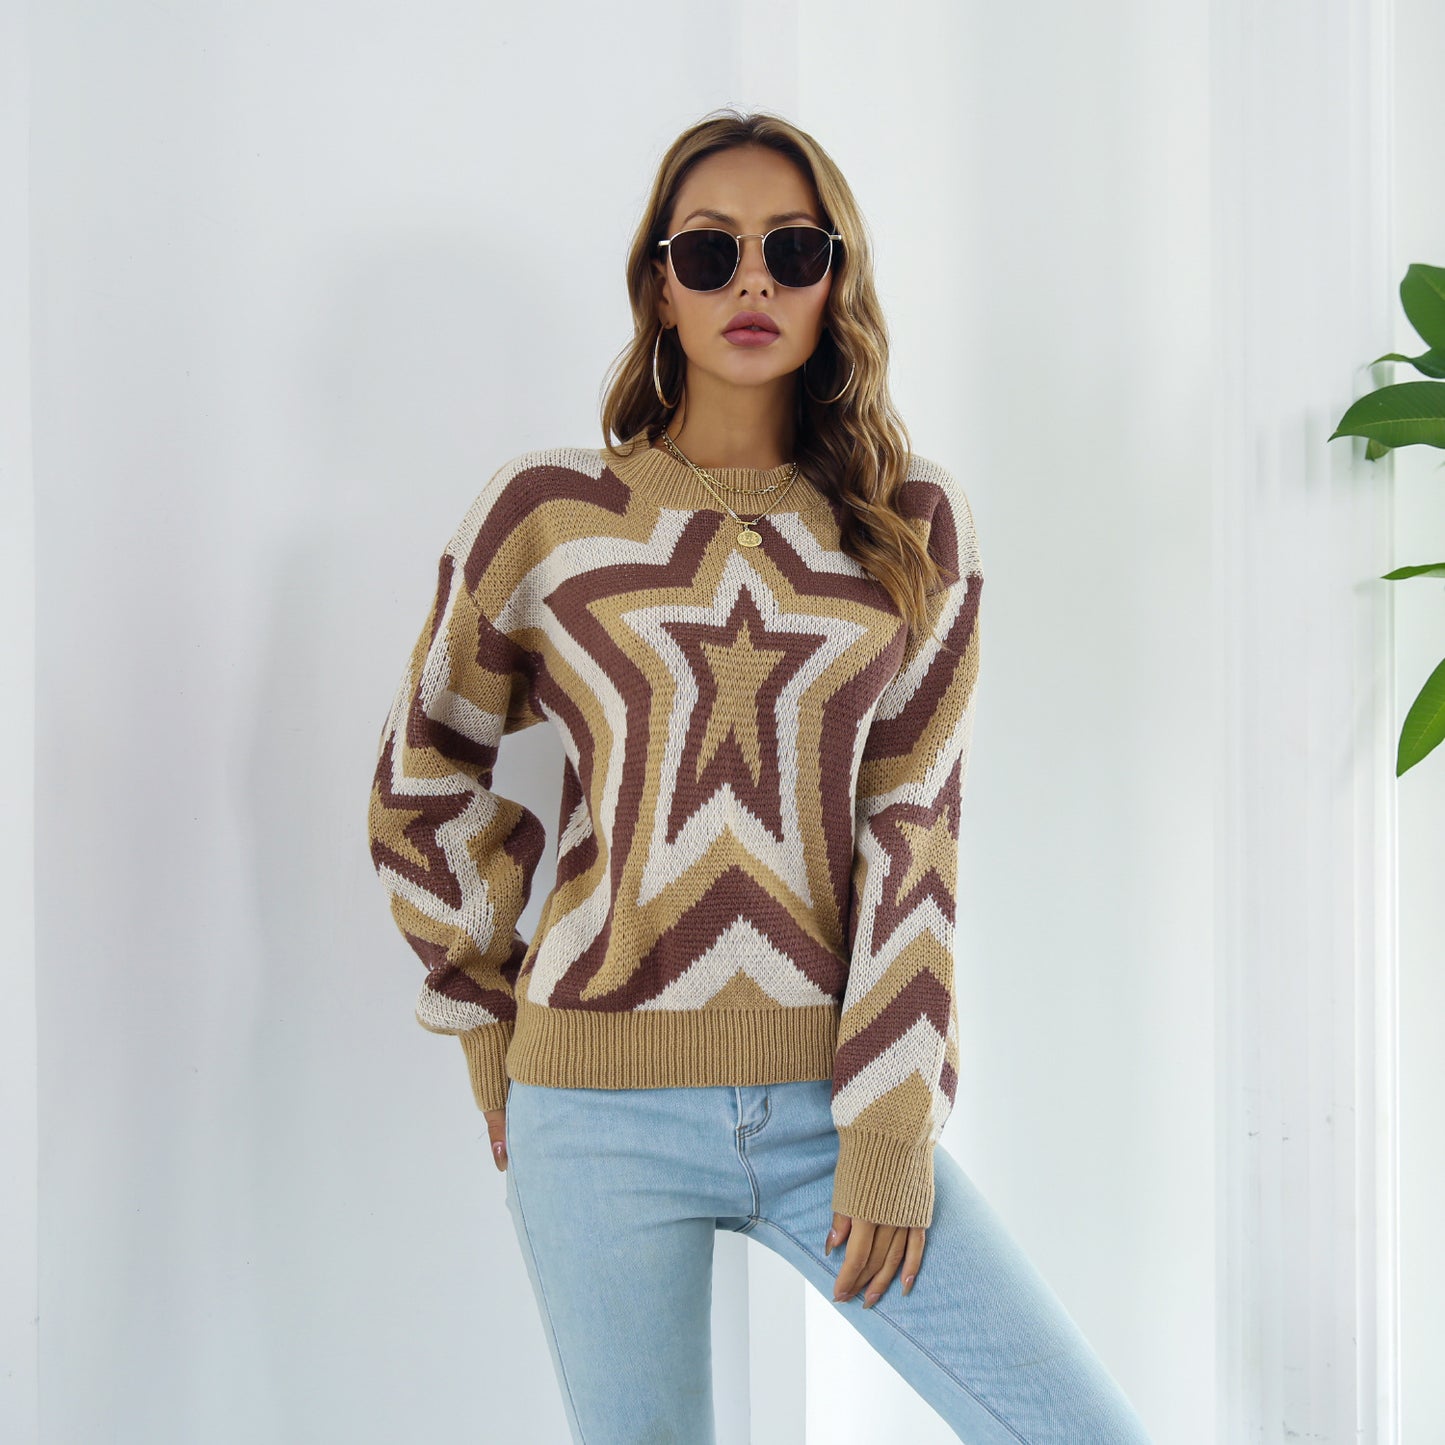 Psychic Star Layered Knit Sweater in Blue or Orange